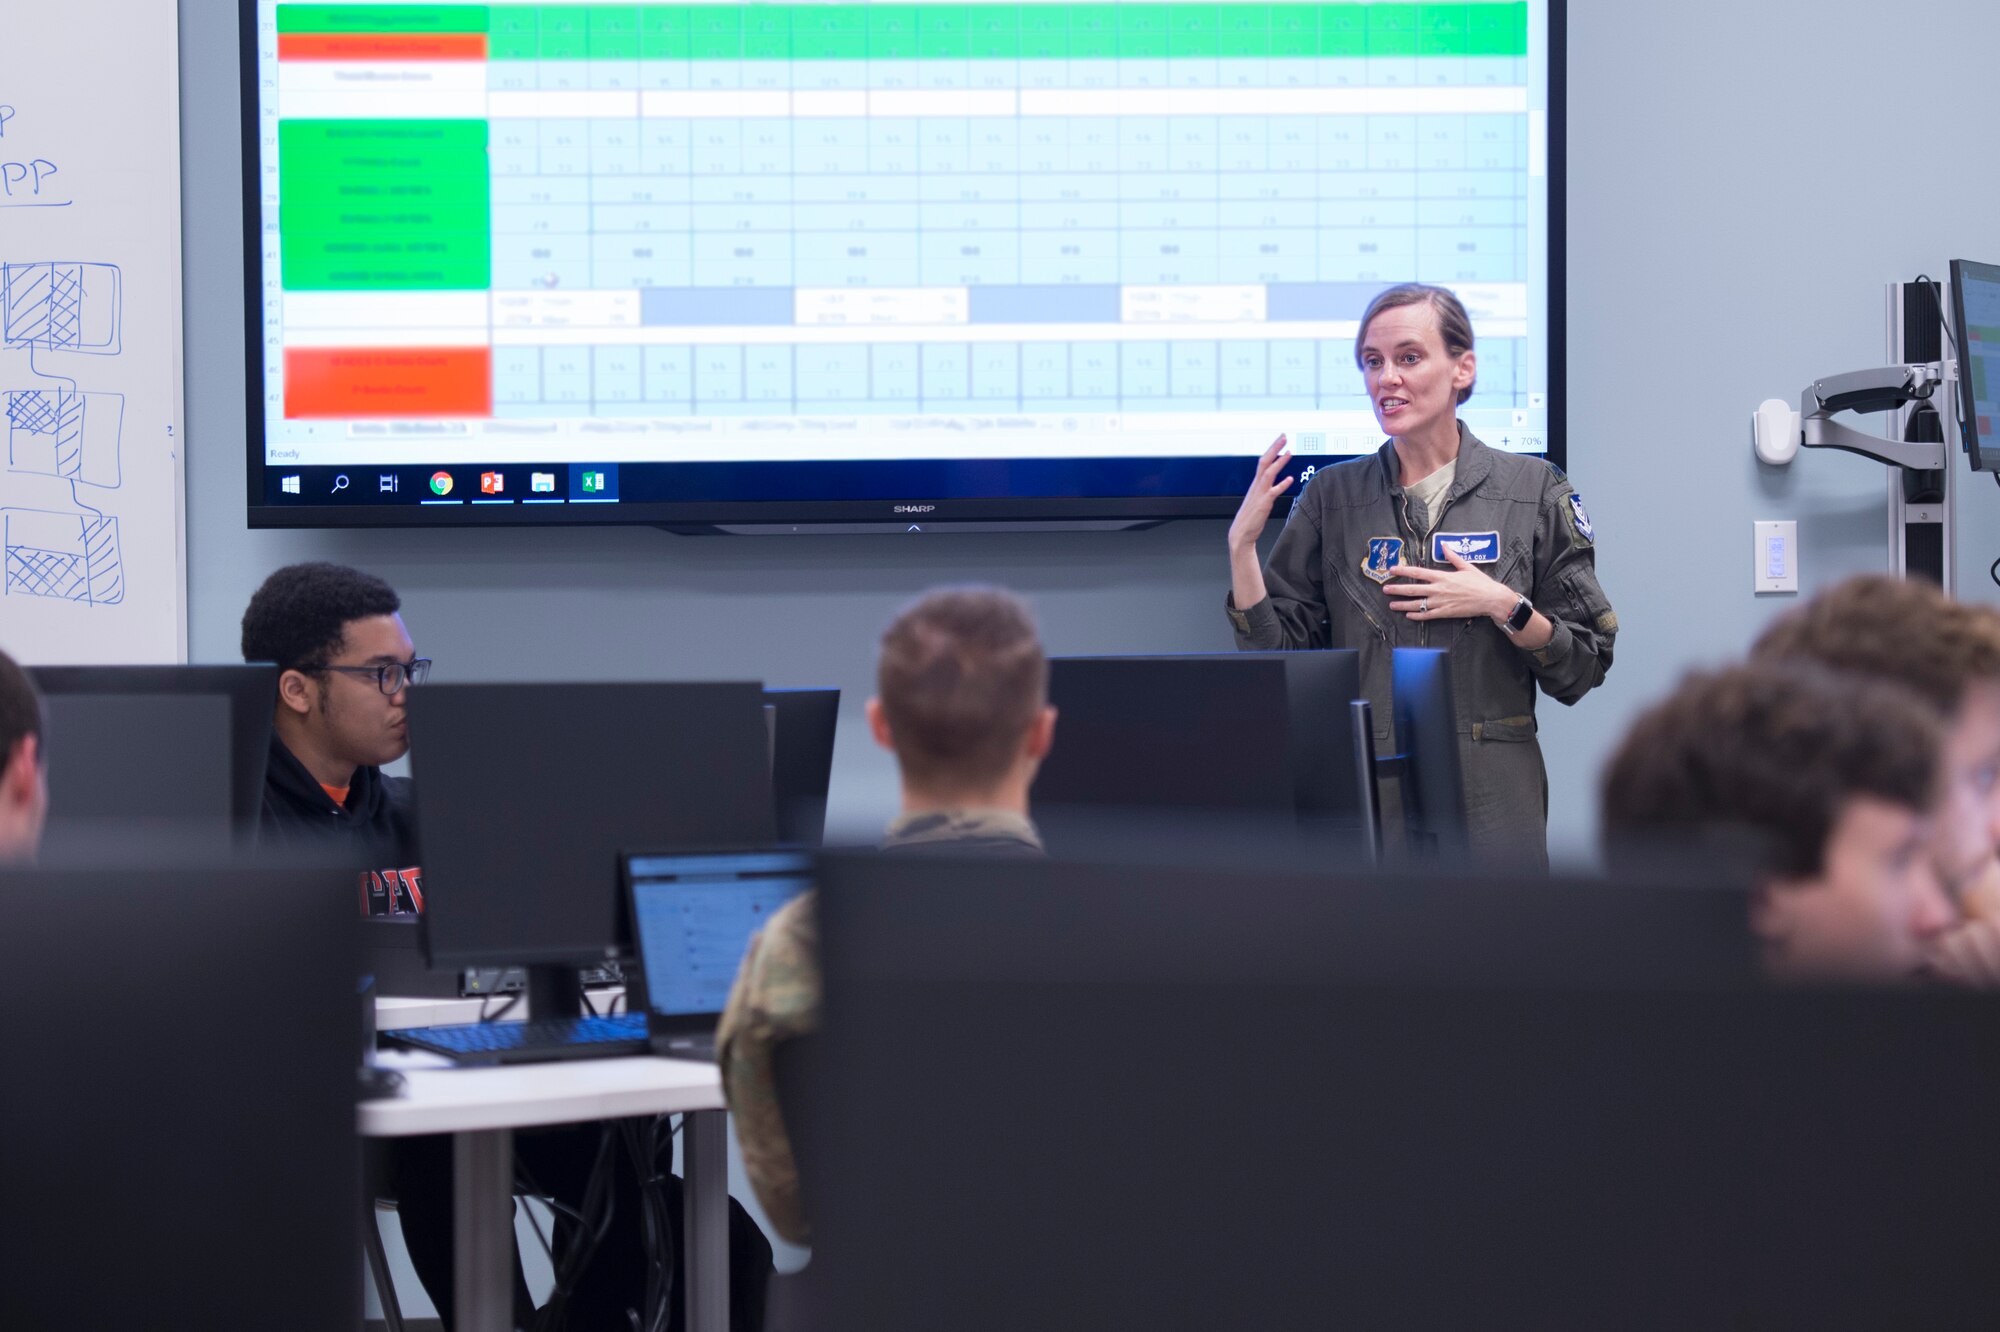 U.S. Air Force Lt. Col. Vanessa Cox, the chief of scheduling with the 116th Operations Support Squadron, Georgia Air National Guard, briefs Mercer University upperclassmen to explain scheduling processes of the E-8C Joint STARS at the Mercer campus in Macon, Ga., Oct. 8, 2019. The students from the computer science department worked on an innovation project to help reform the way JSTARS scheduling is run.